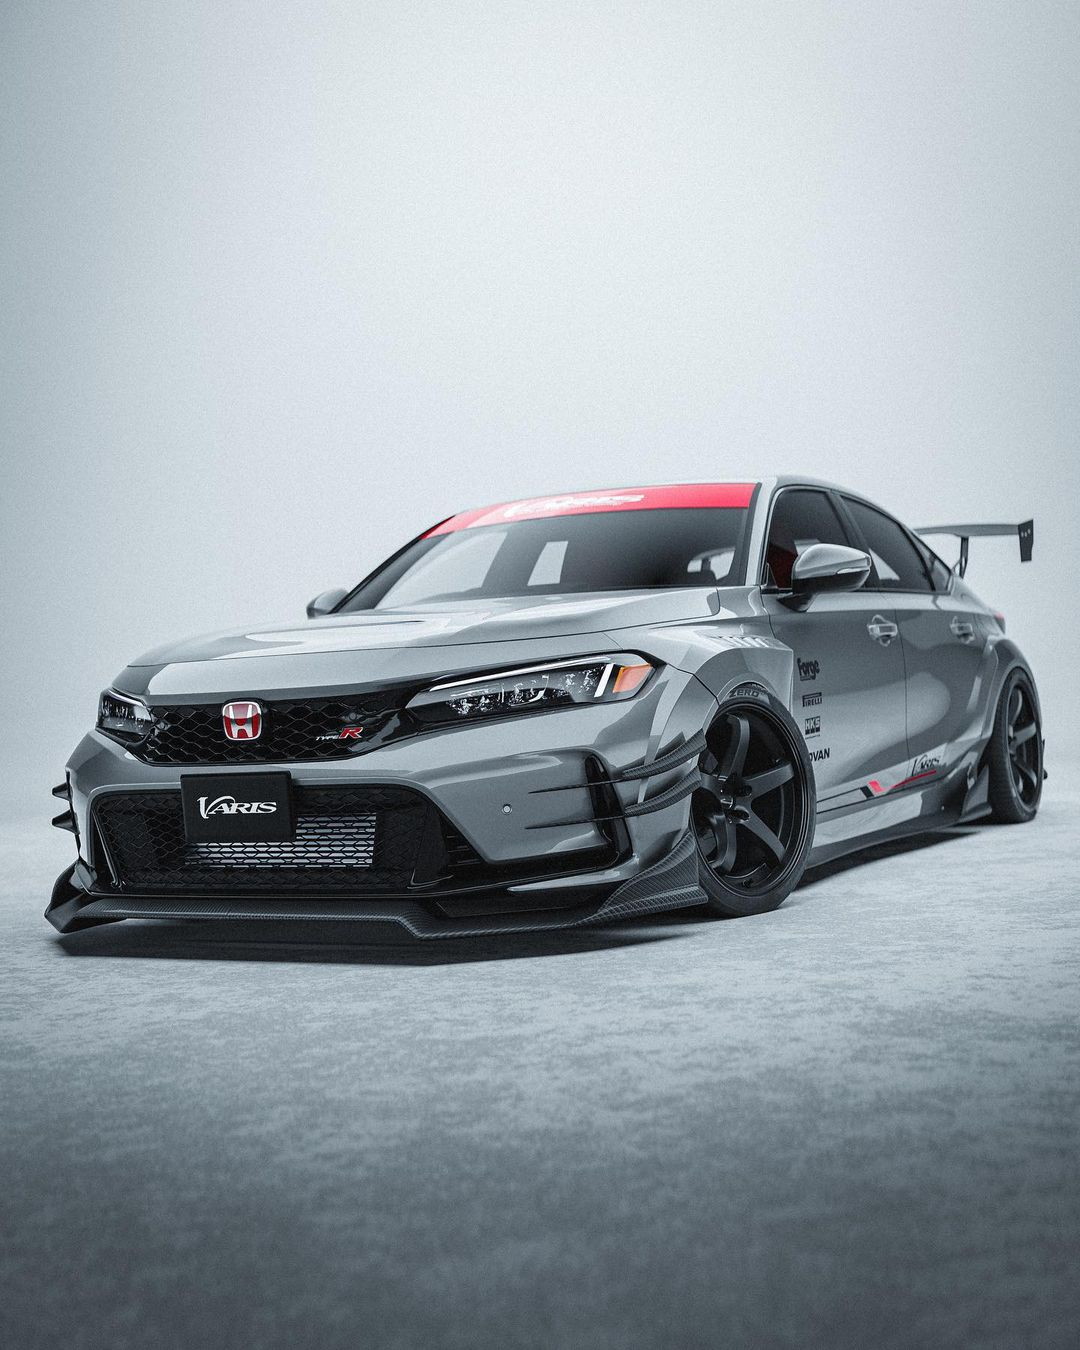 2023 Honda Civic Type R Adopts a Meaner Stance, Body Kit Ain't Real